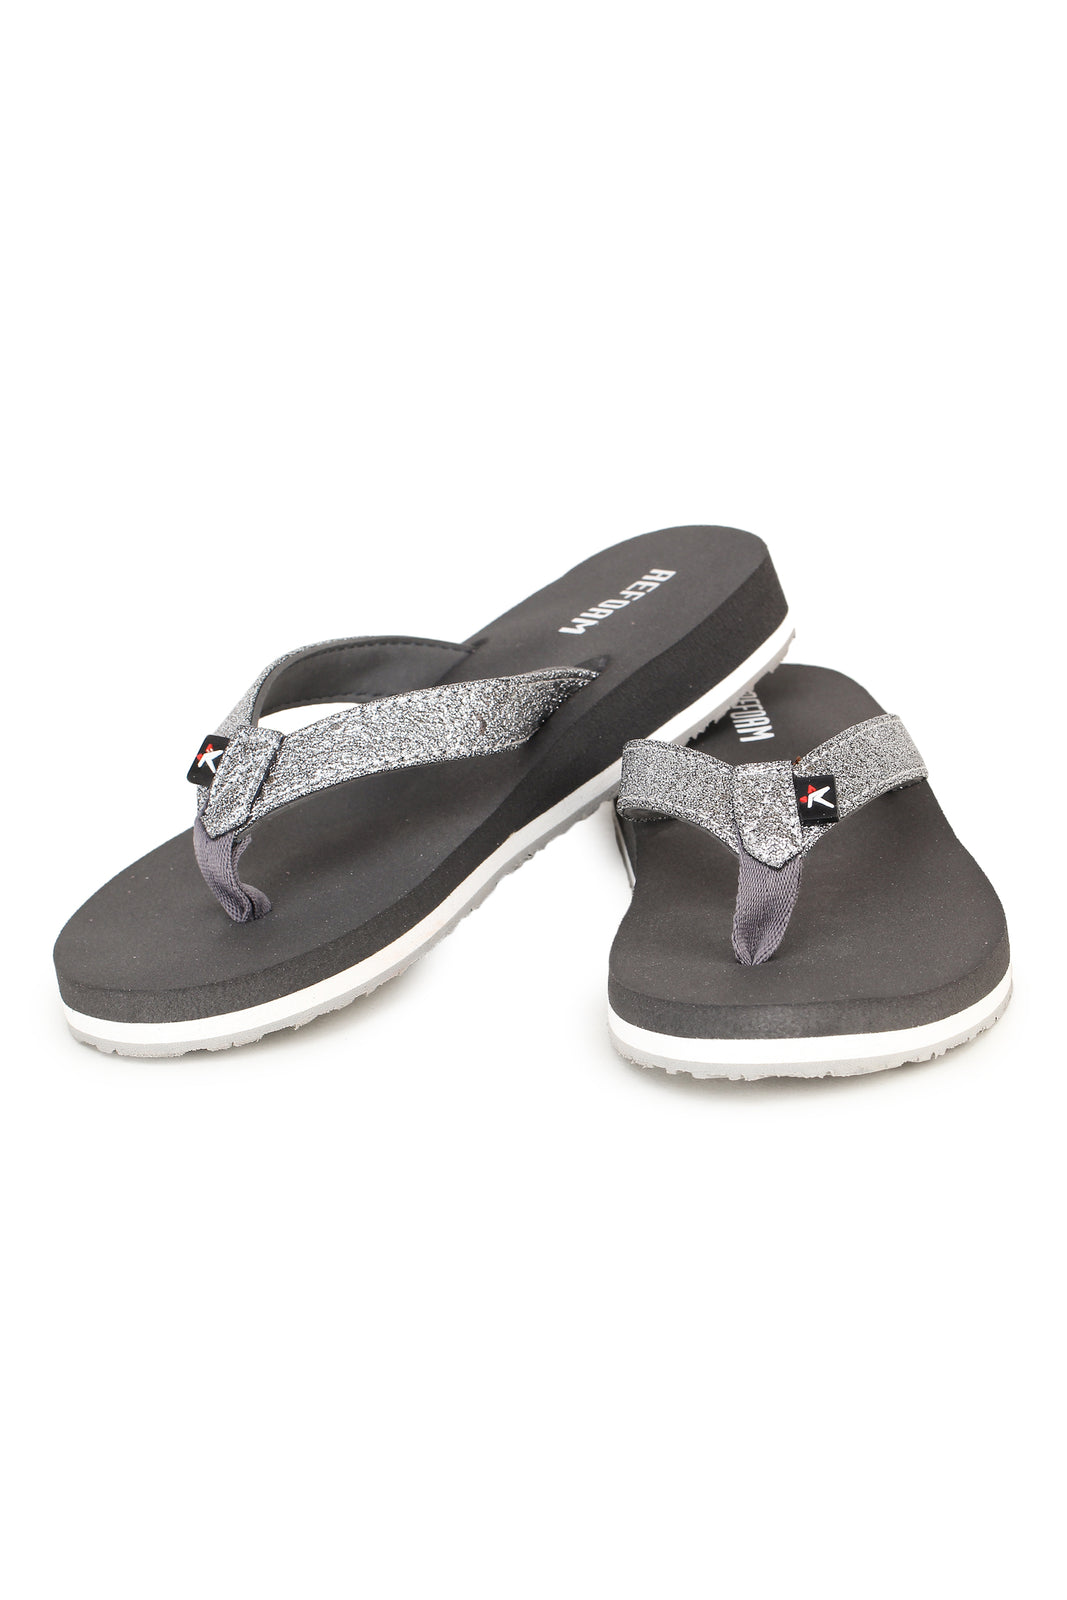 Grey Solid Rubber Slip On Casual Slippers For Women